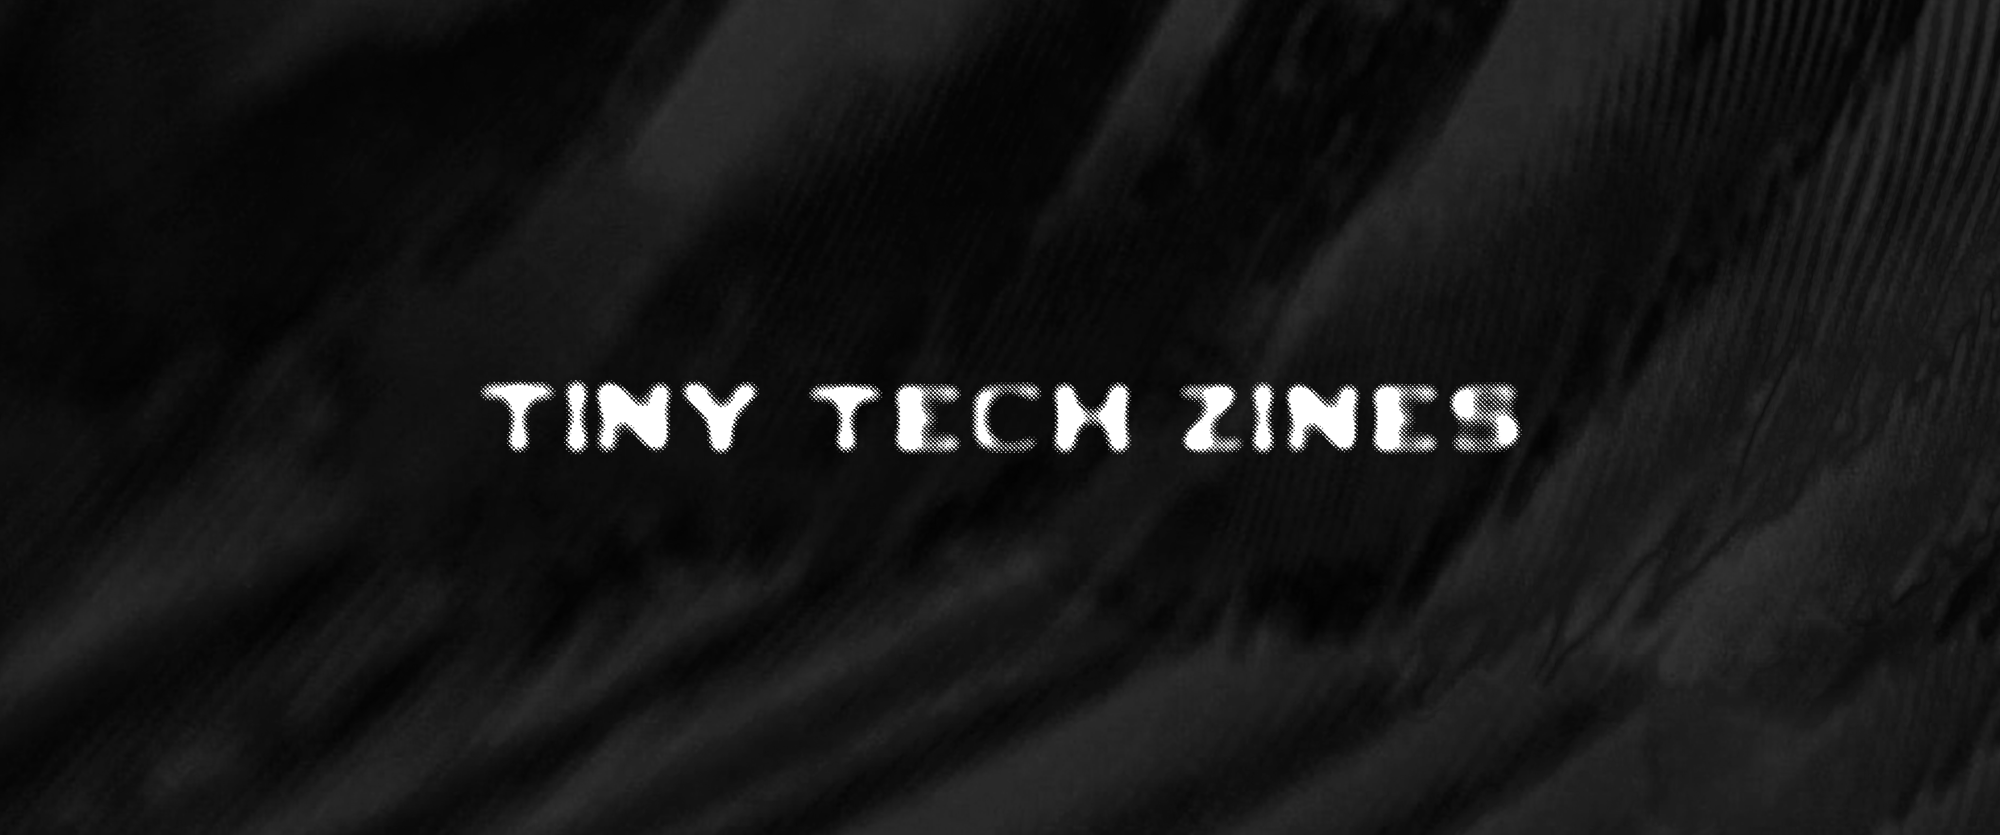 Project thumbnail for Tiny Tech Zines